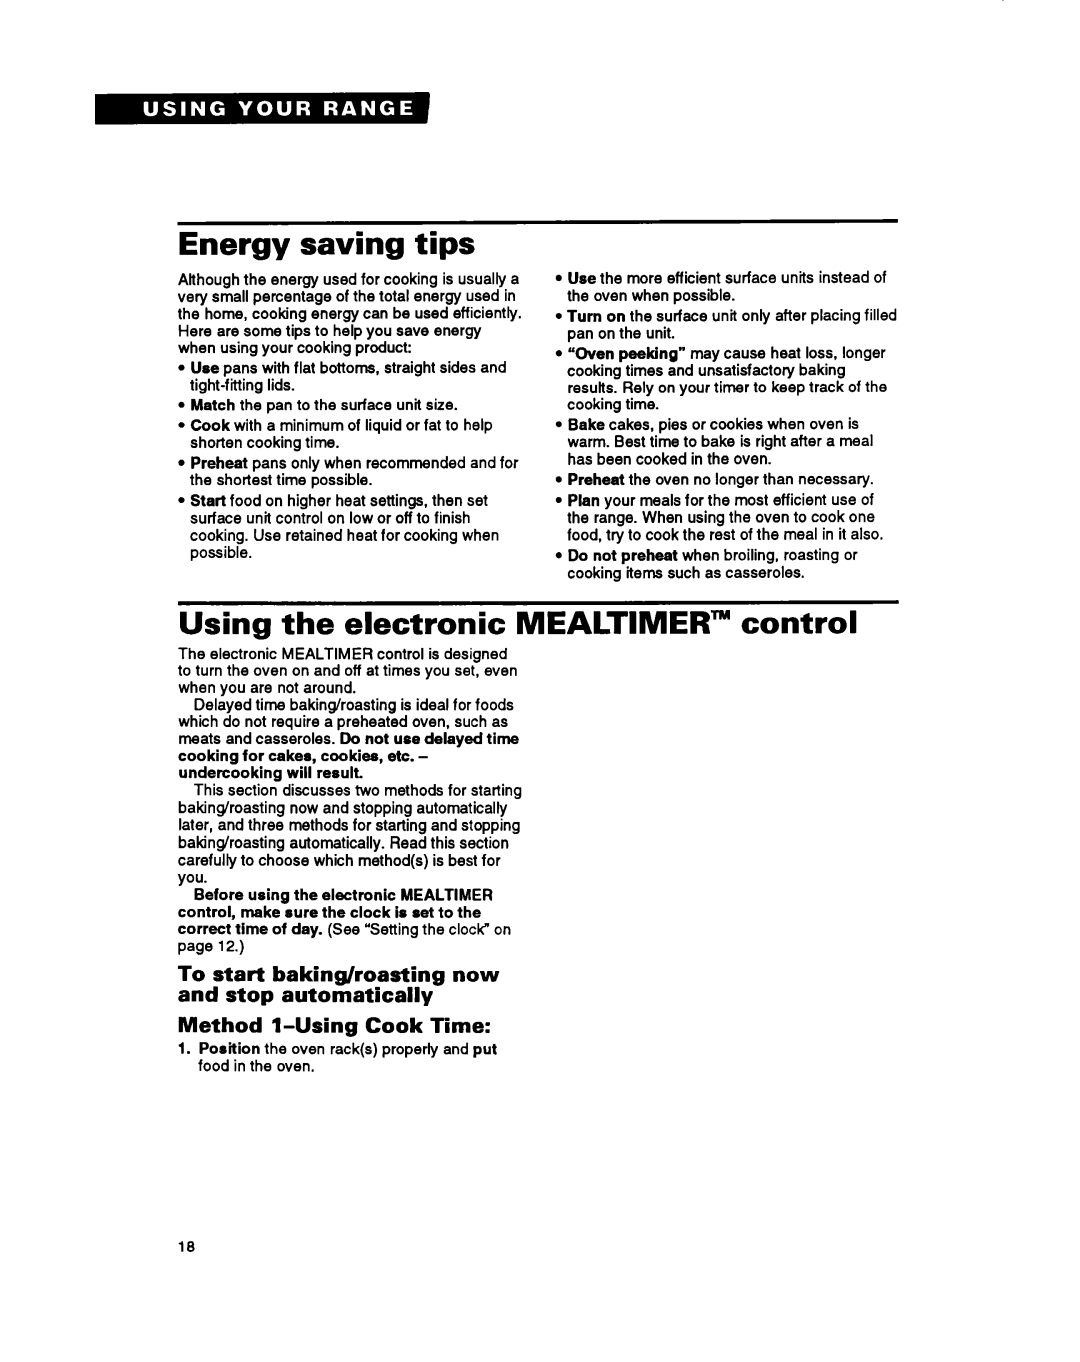 Whirlpool RS696PXB warranty Energy saving tips, Using the electronic MEALTIMER” control, Method l-UsingCook Time 